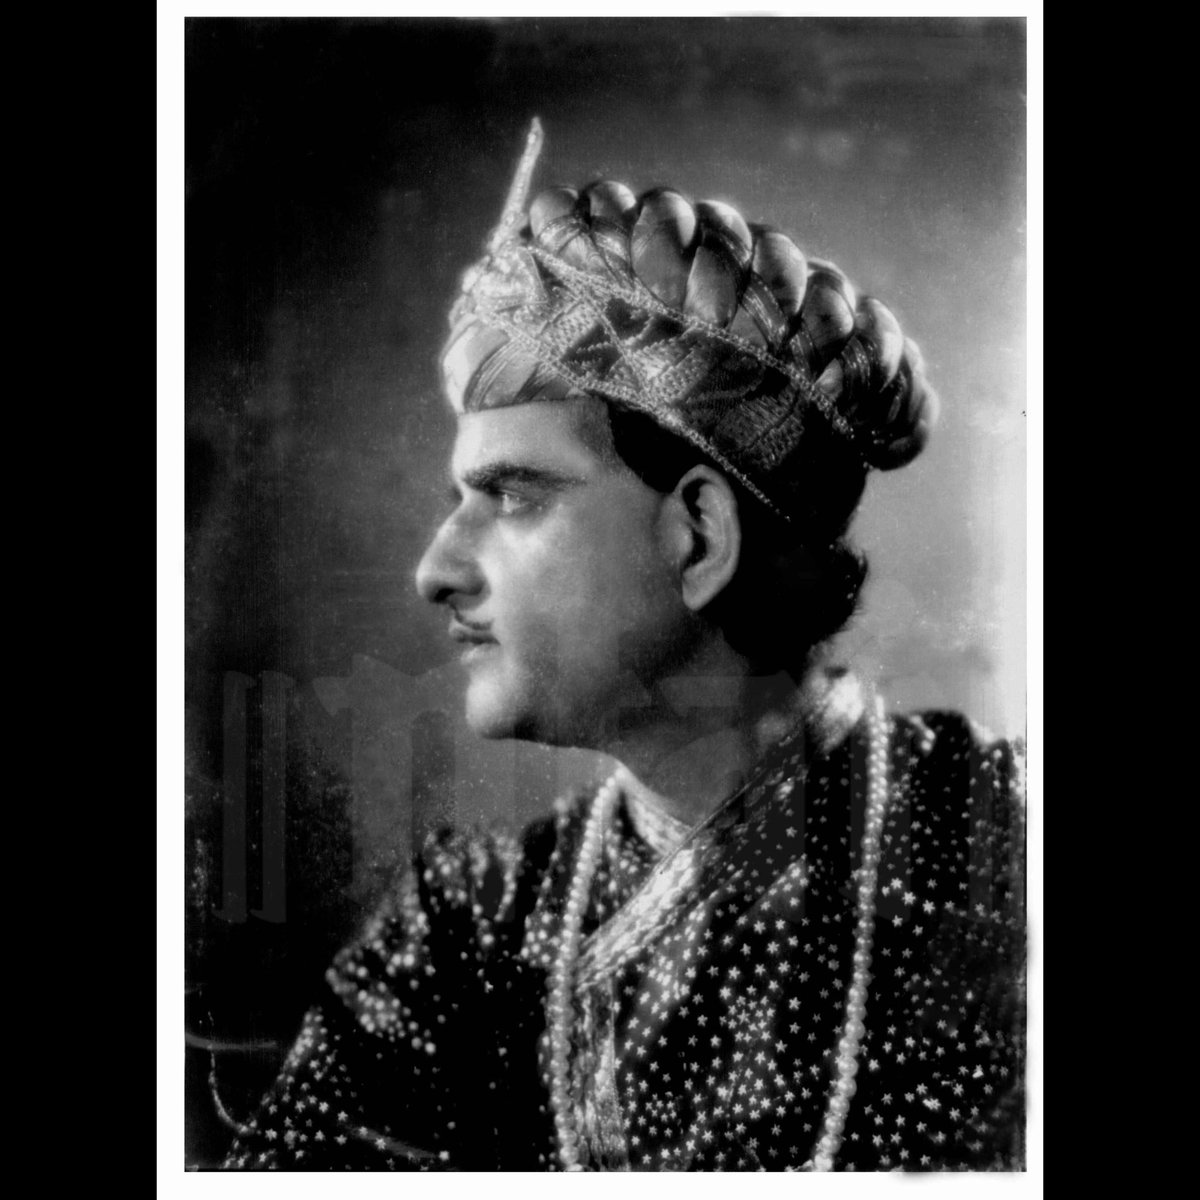 #KLSaigal appears in a stunning profile as the beloved and gifted musician #Tansen in the film Tansen (1943) directed by #JayantDesai. The much loved music of the film was composed by #KhemchandPrakash with lyrics by Pandit Indra and K.L. Saigal and #KhursheedBano as singers.